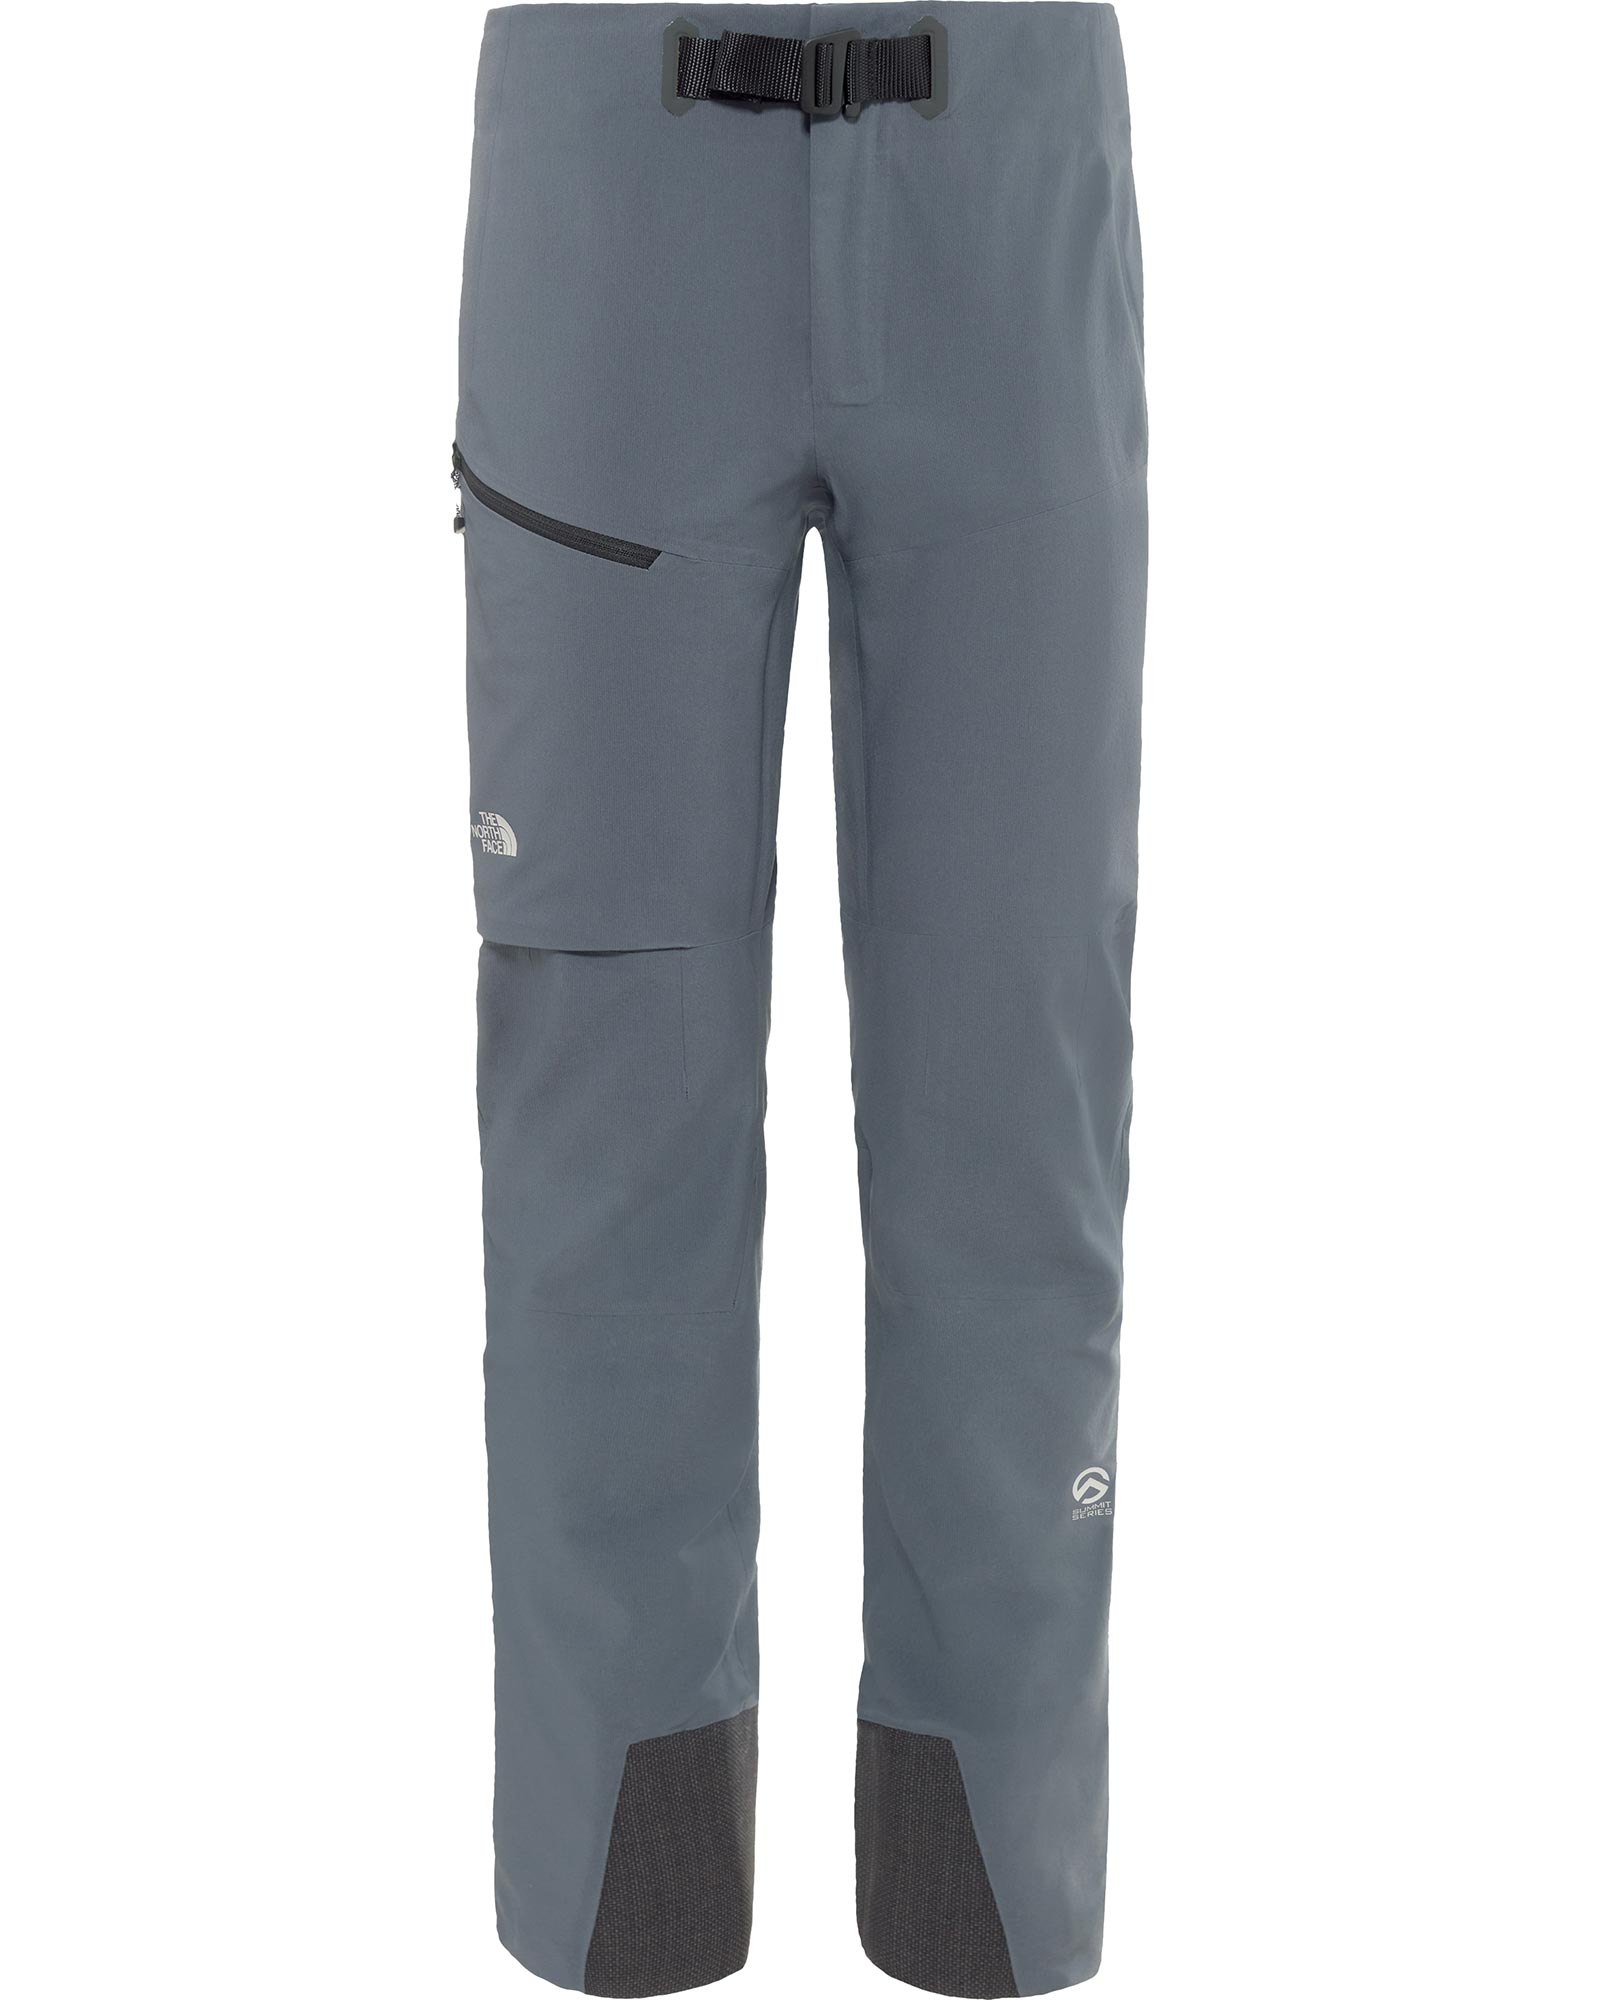 The North Face Proprius L4 Soft Shell Women’s Pants - Turbulence Grey S